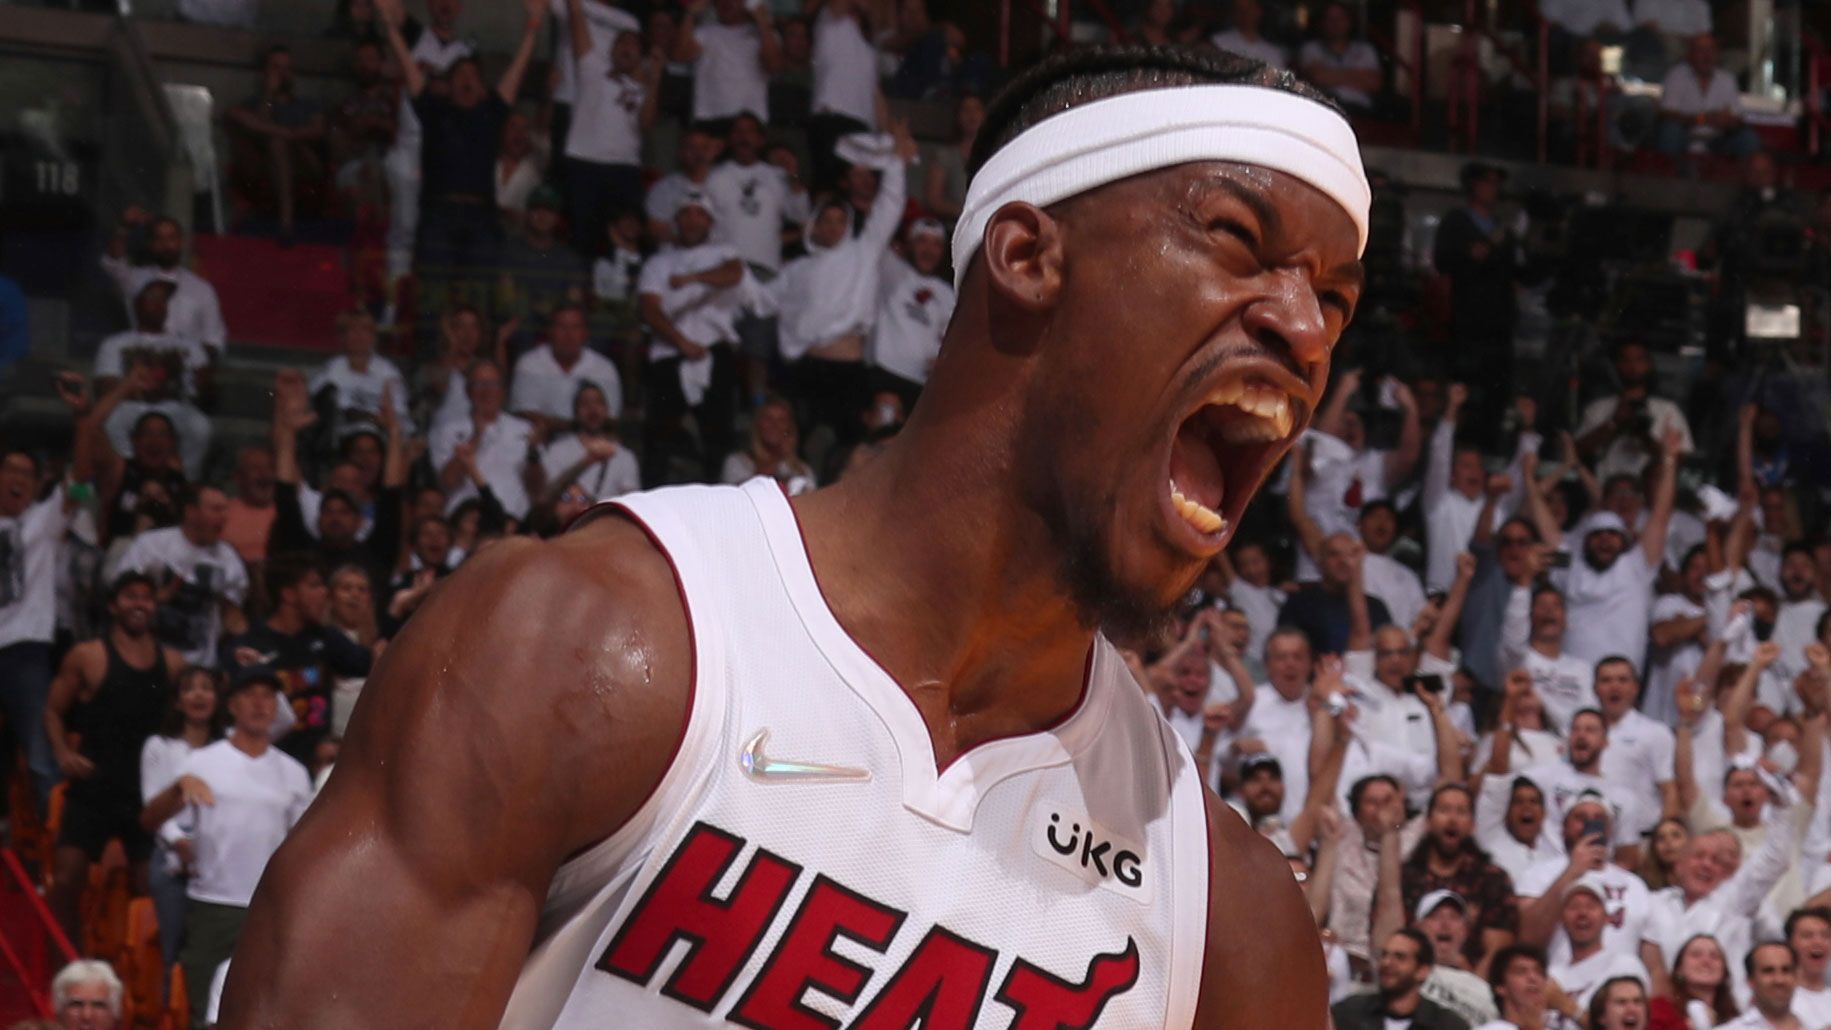 Heat star Jimmy Butler celebrates a bucket during game one of the Eastern Conference Finals against the Celtics.